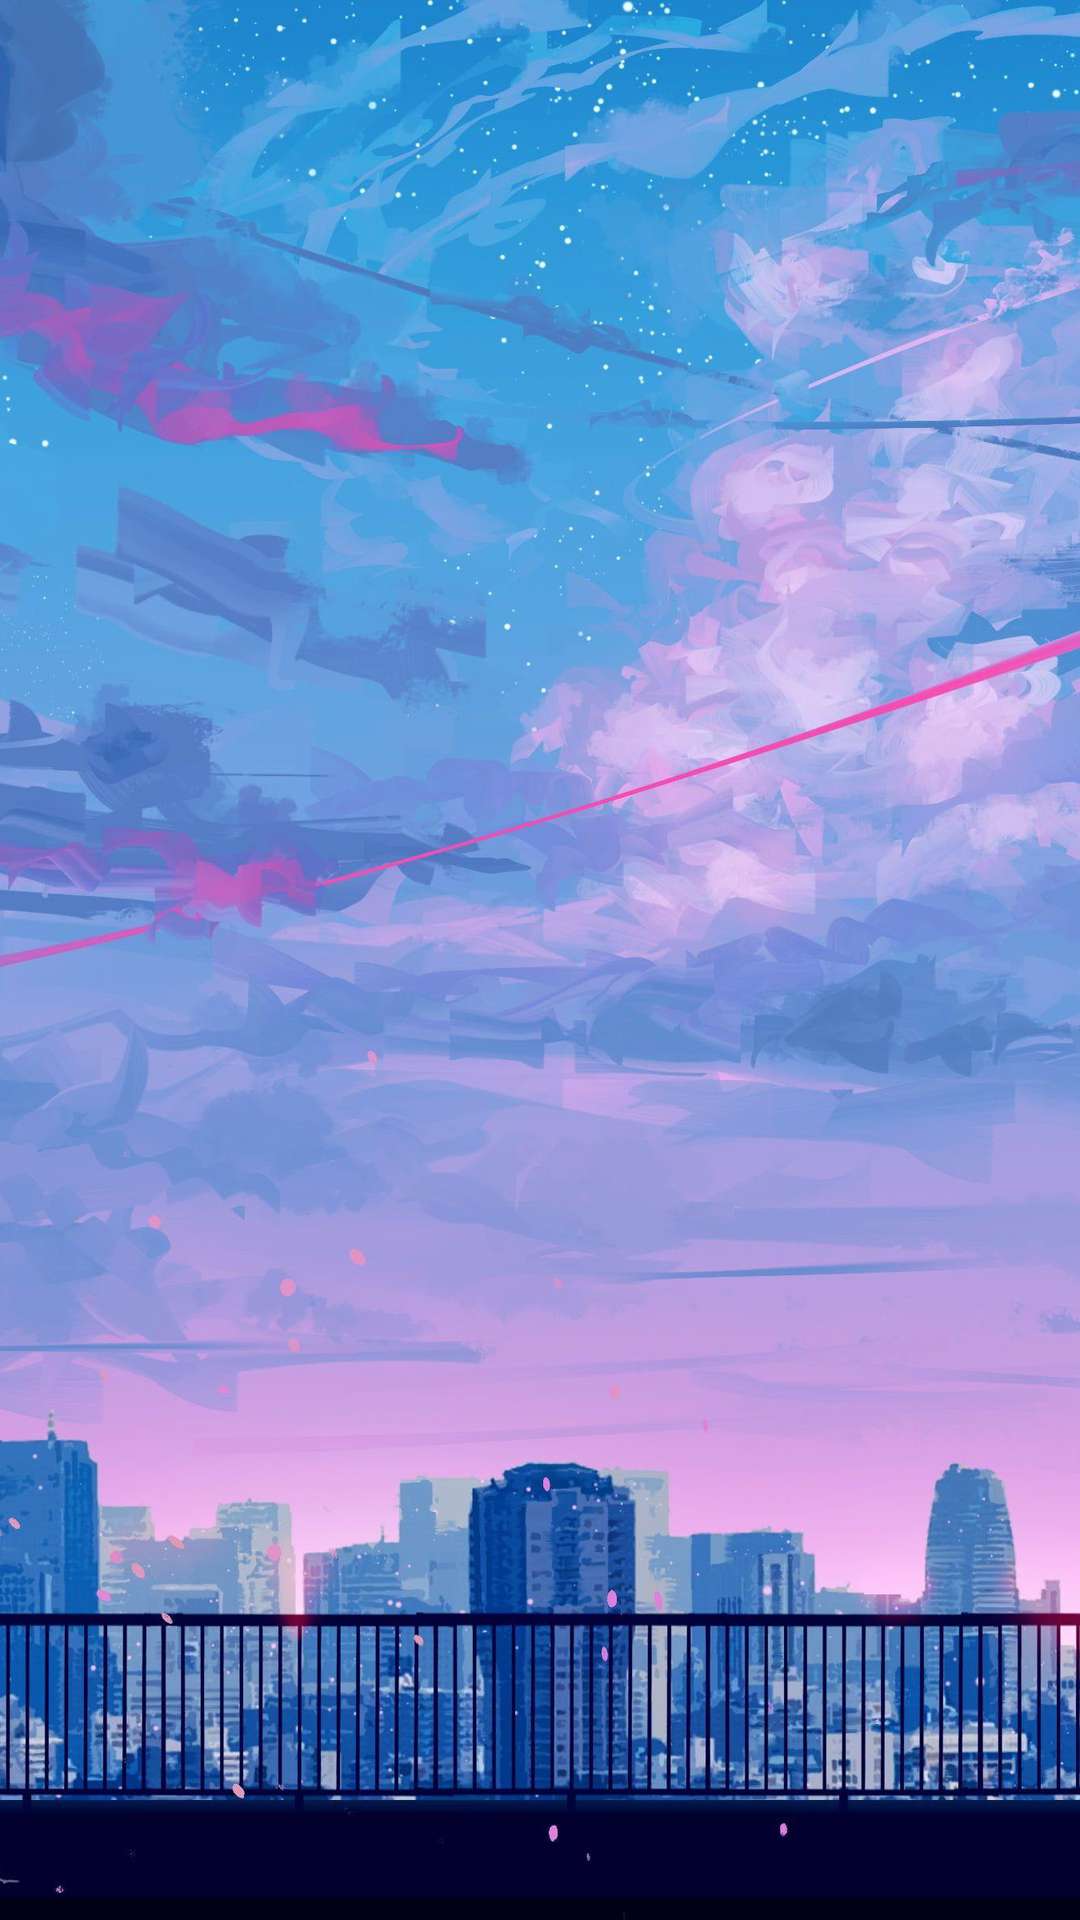 Anime City iPhone Wallpaper  iPhone Wallpapers  iPhone Wallpapers